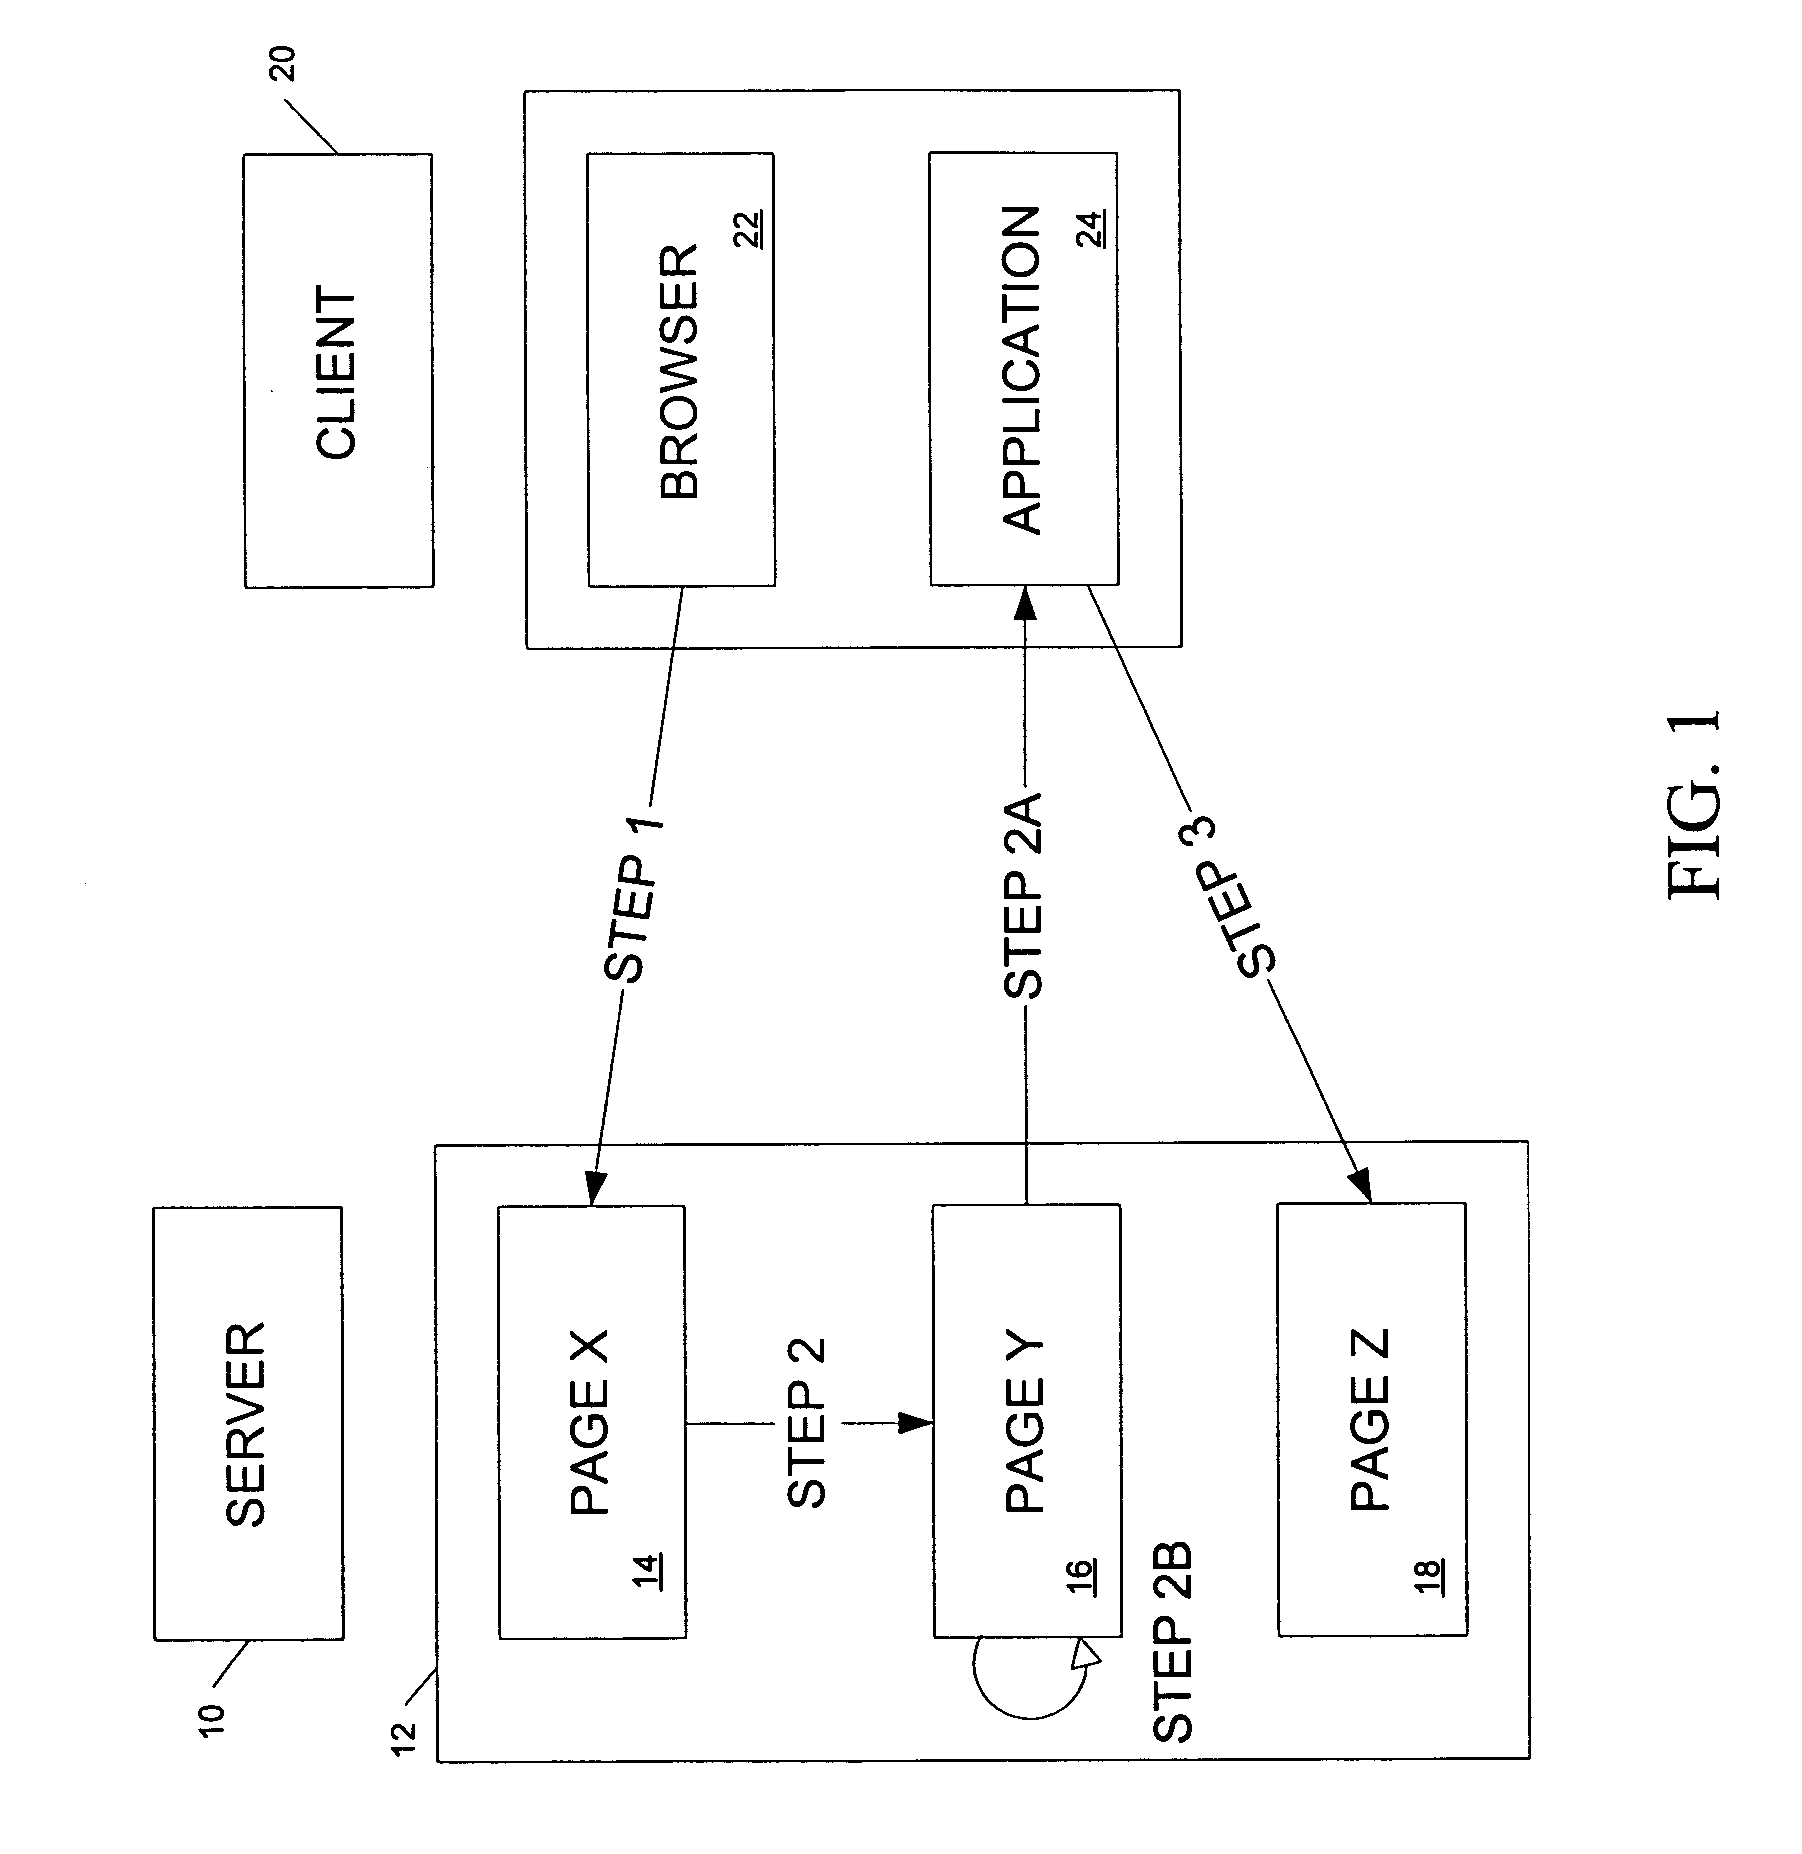 Method of communicating between web applications and local client application while maintaining remote user session